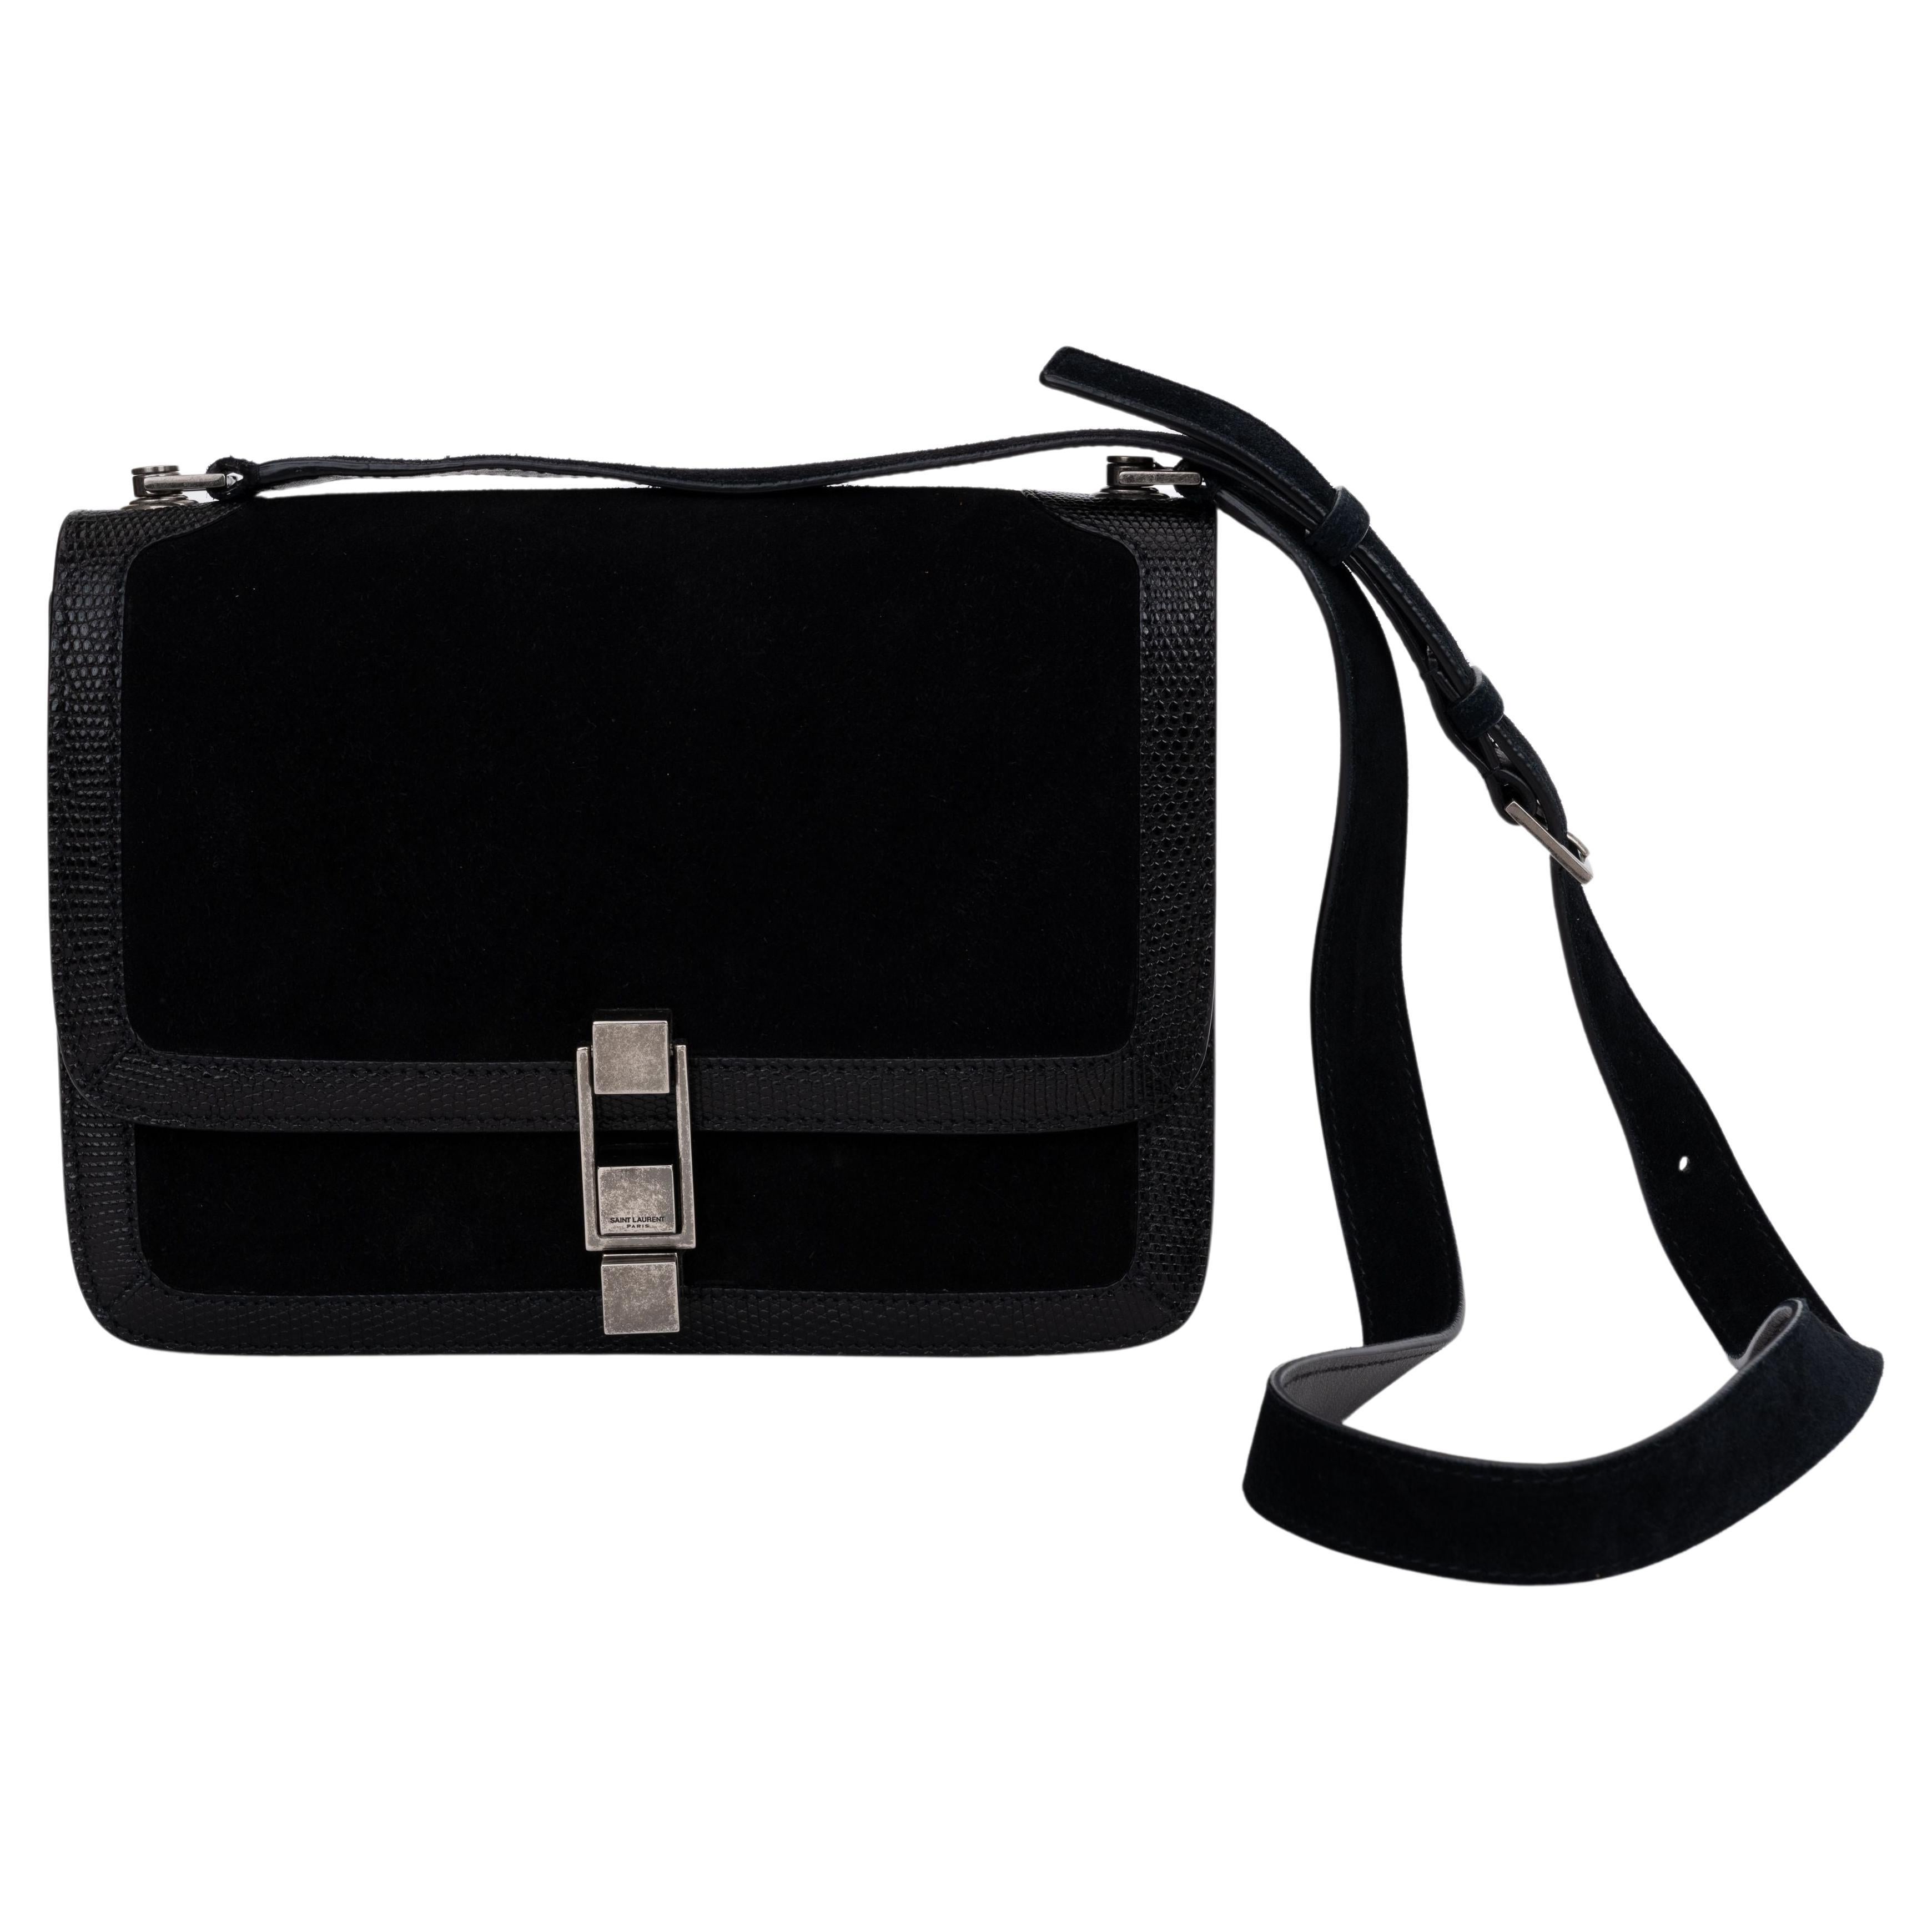 YSL New Black Suede Cross Body Bag For Sale